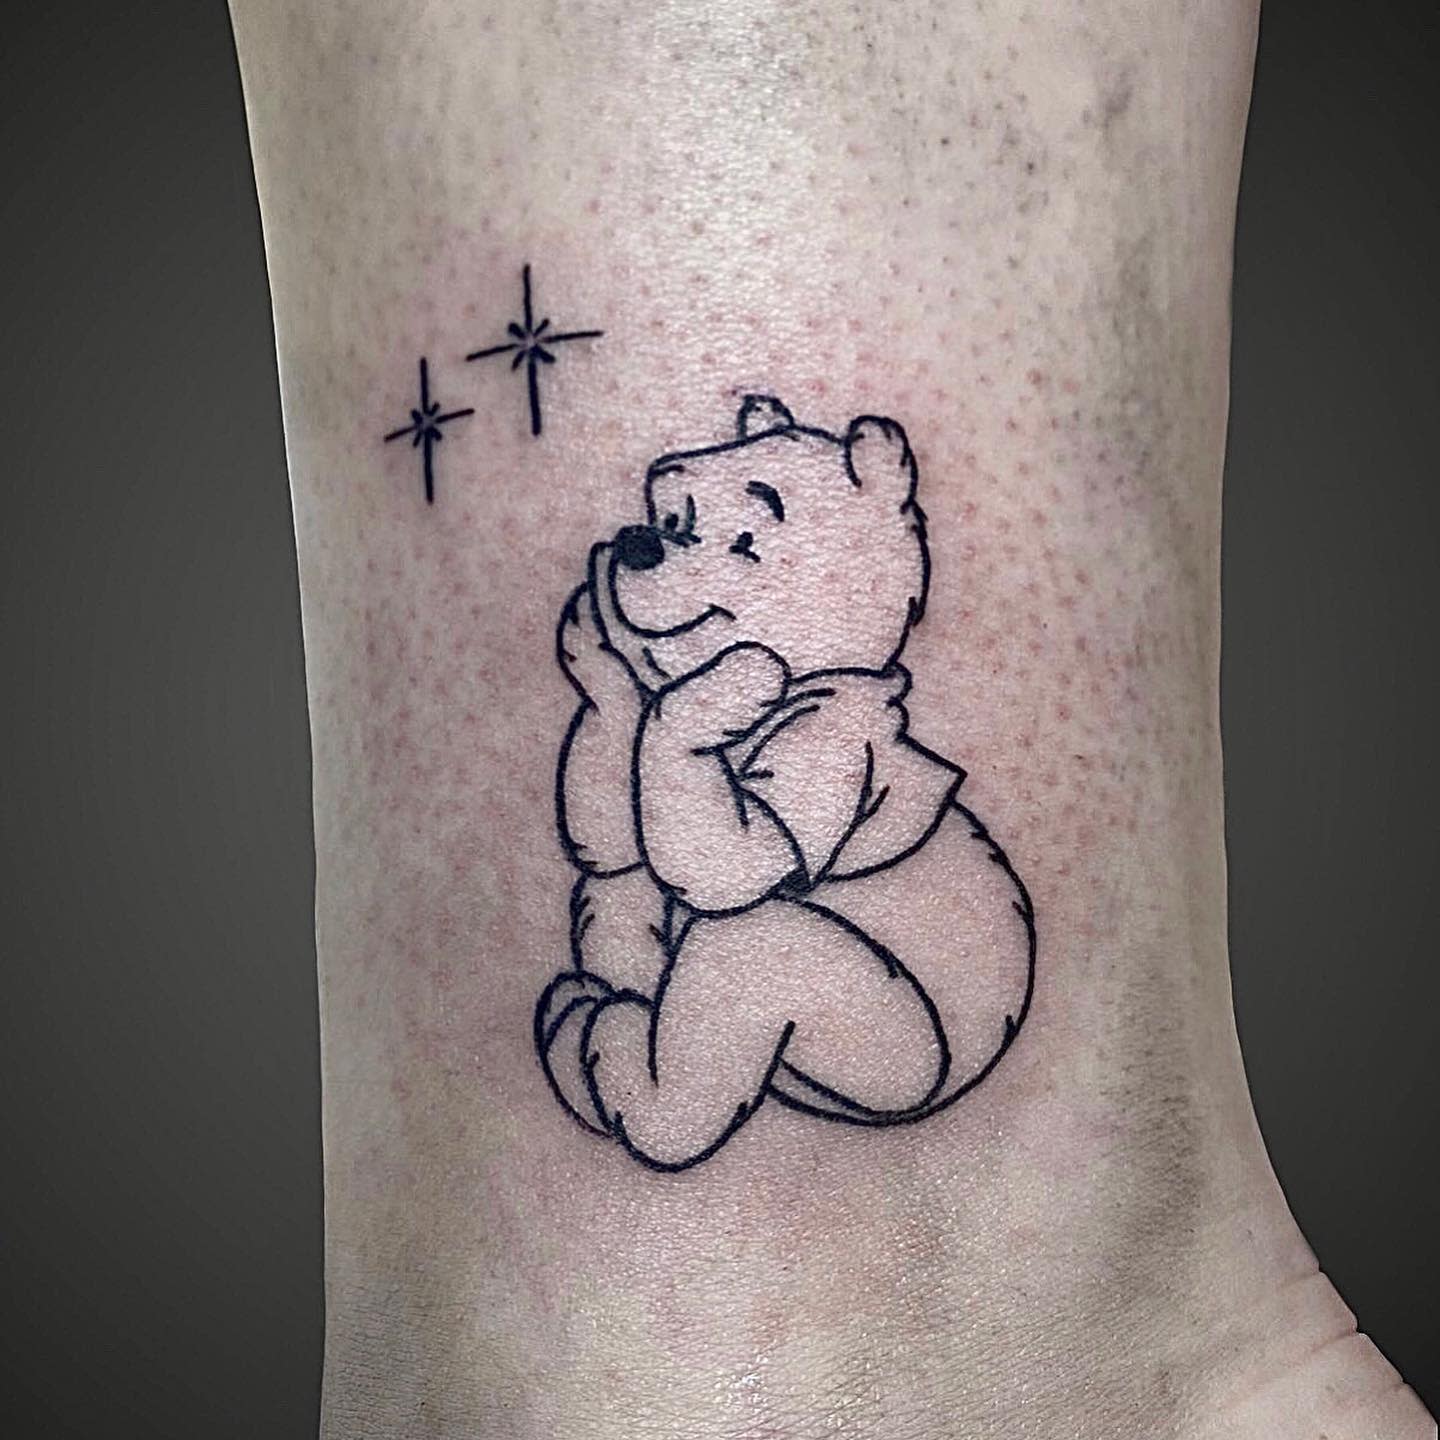 alex magallon reccomend whinnie the pooh tattoo pic